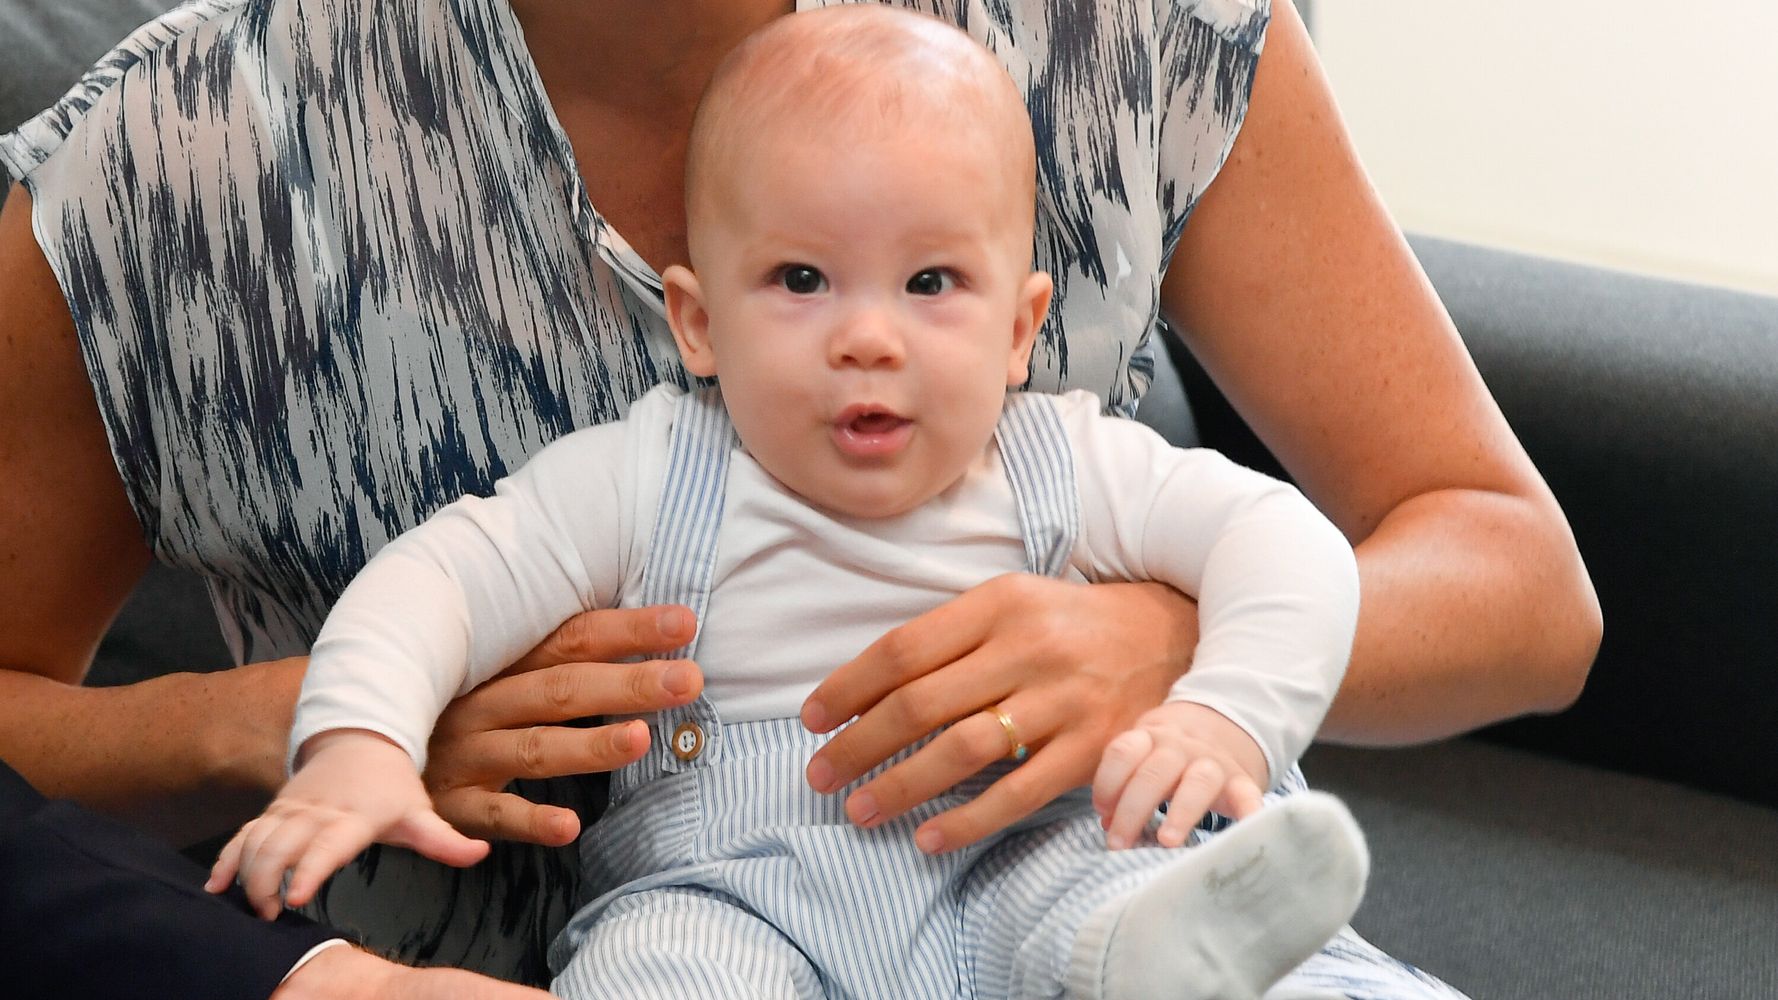 Adorable Royal Baby Pictures Throughout The Years